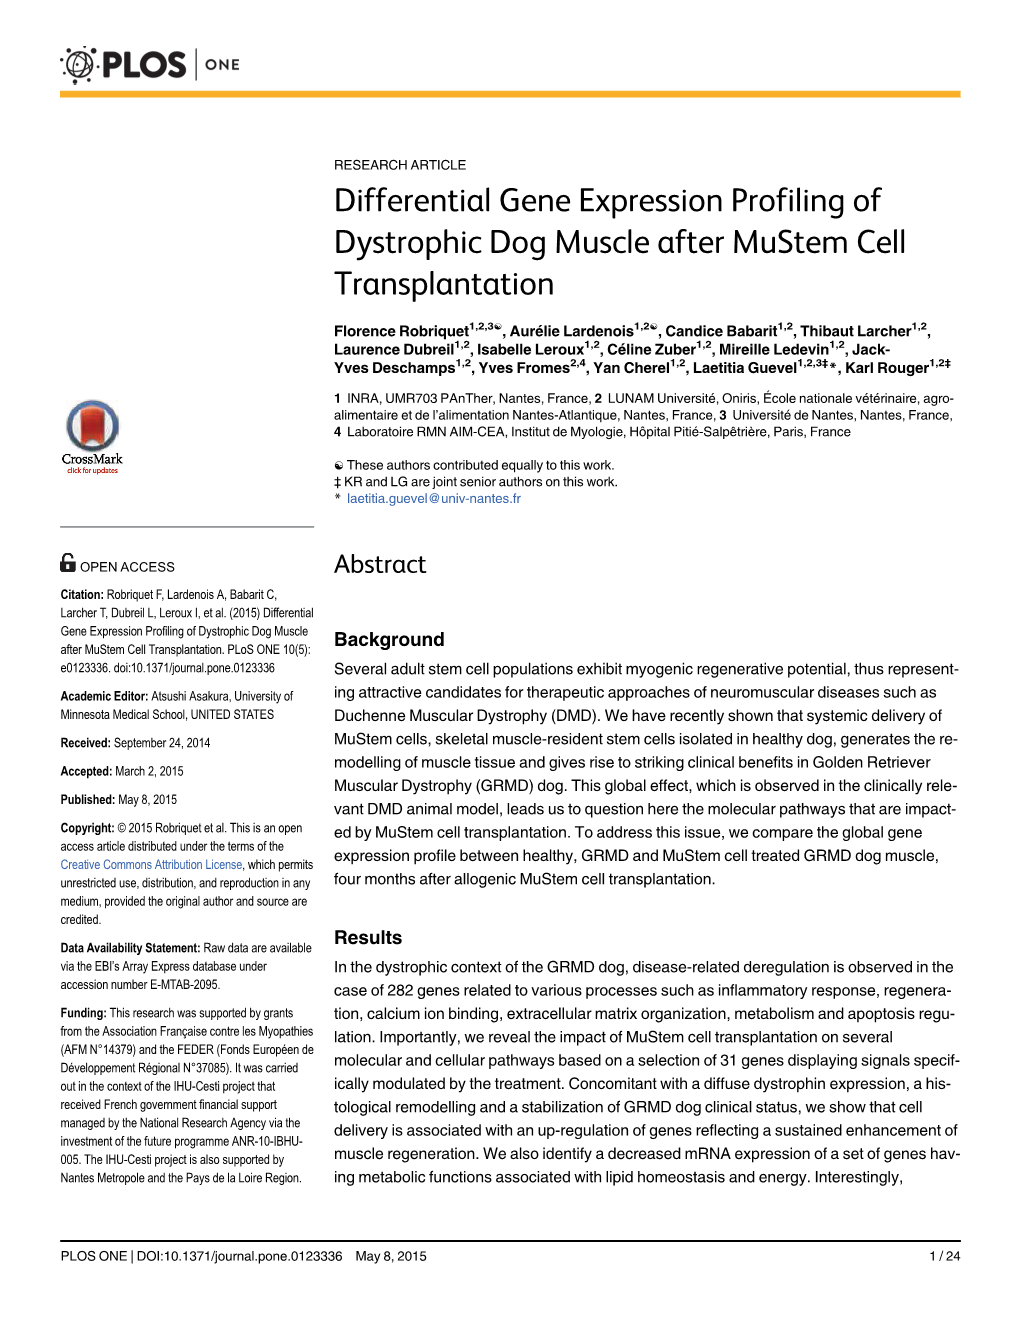 Differential Gene Expression Profiling of Dystrophic Dog Muscle After Mustem Cell Transplantation